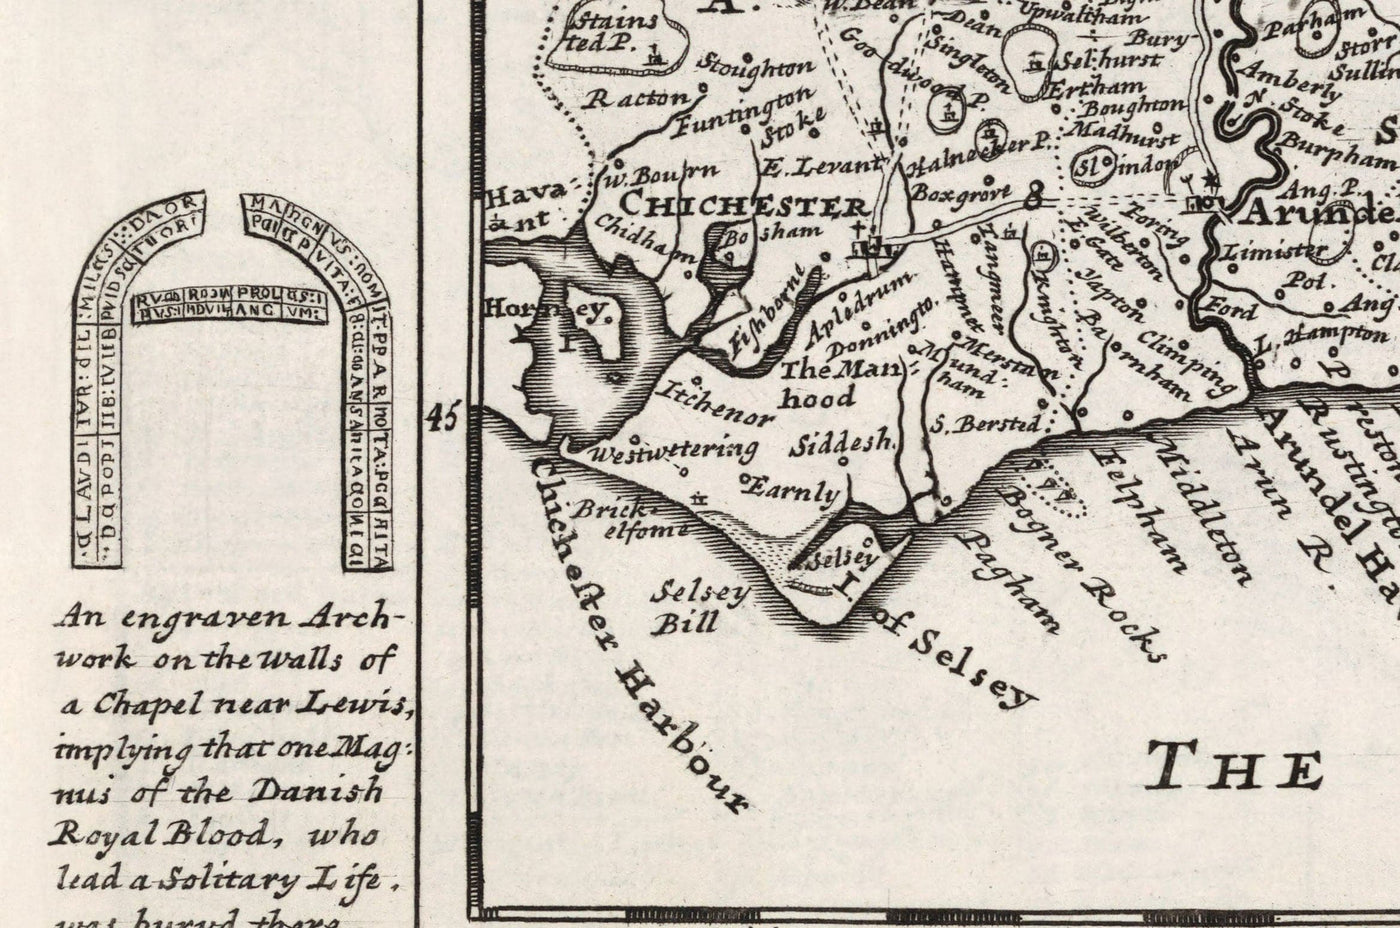 Old Map of Sussex 1724, by Herman Moll - Worthing, Crawley, Brighton, Bognor, Eastbourne